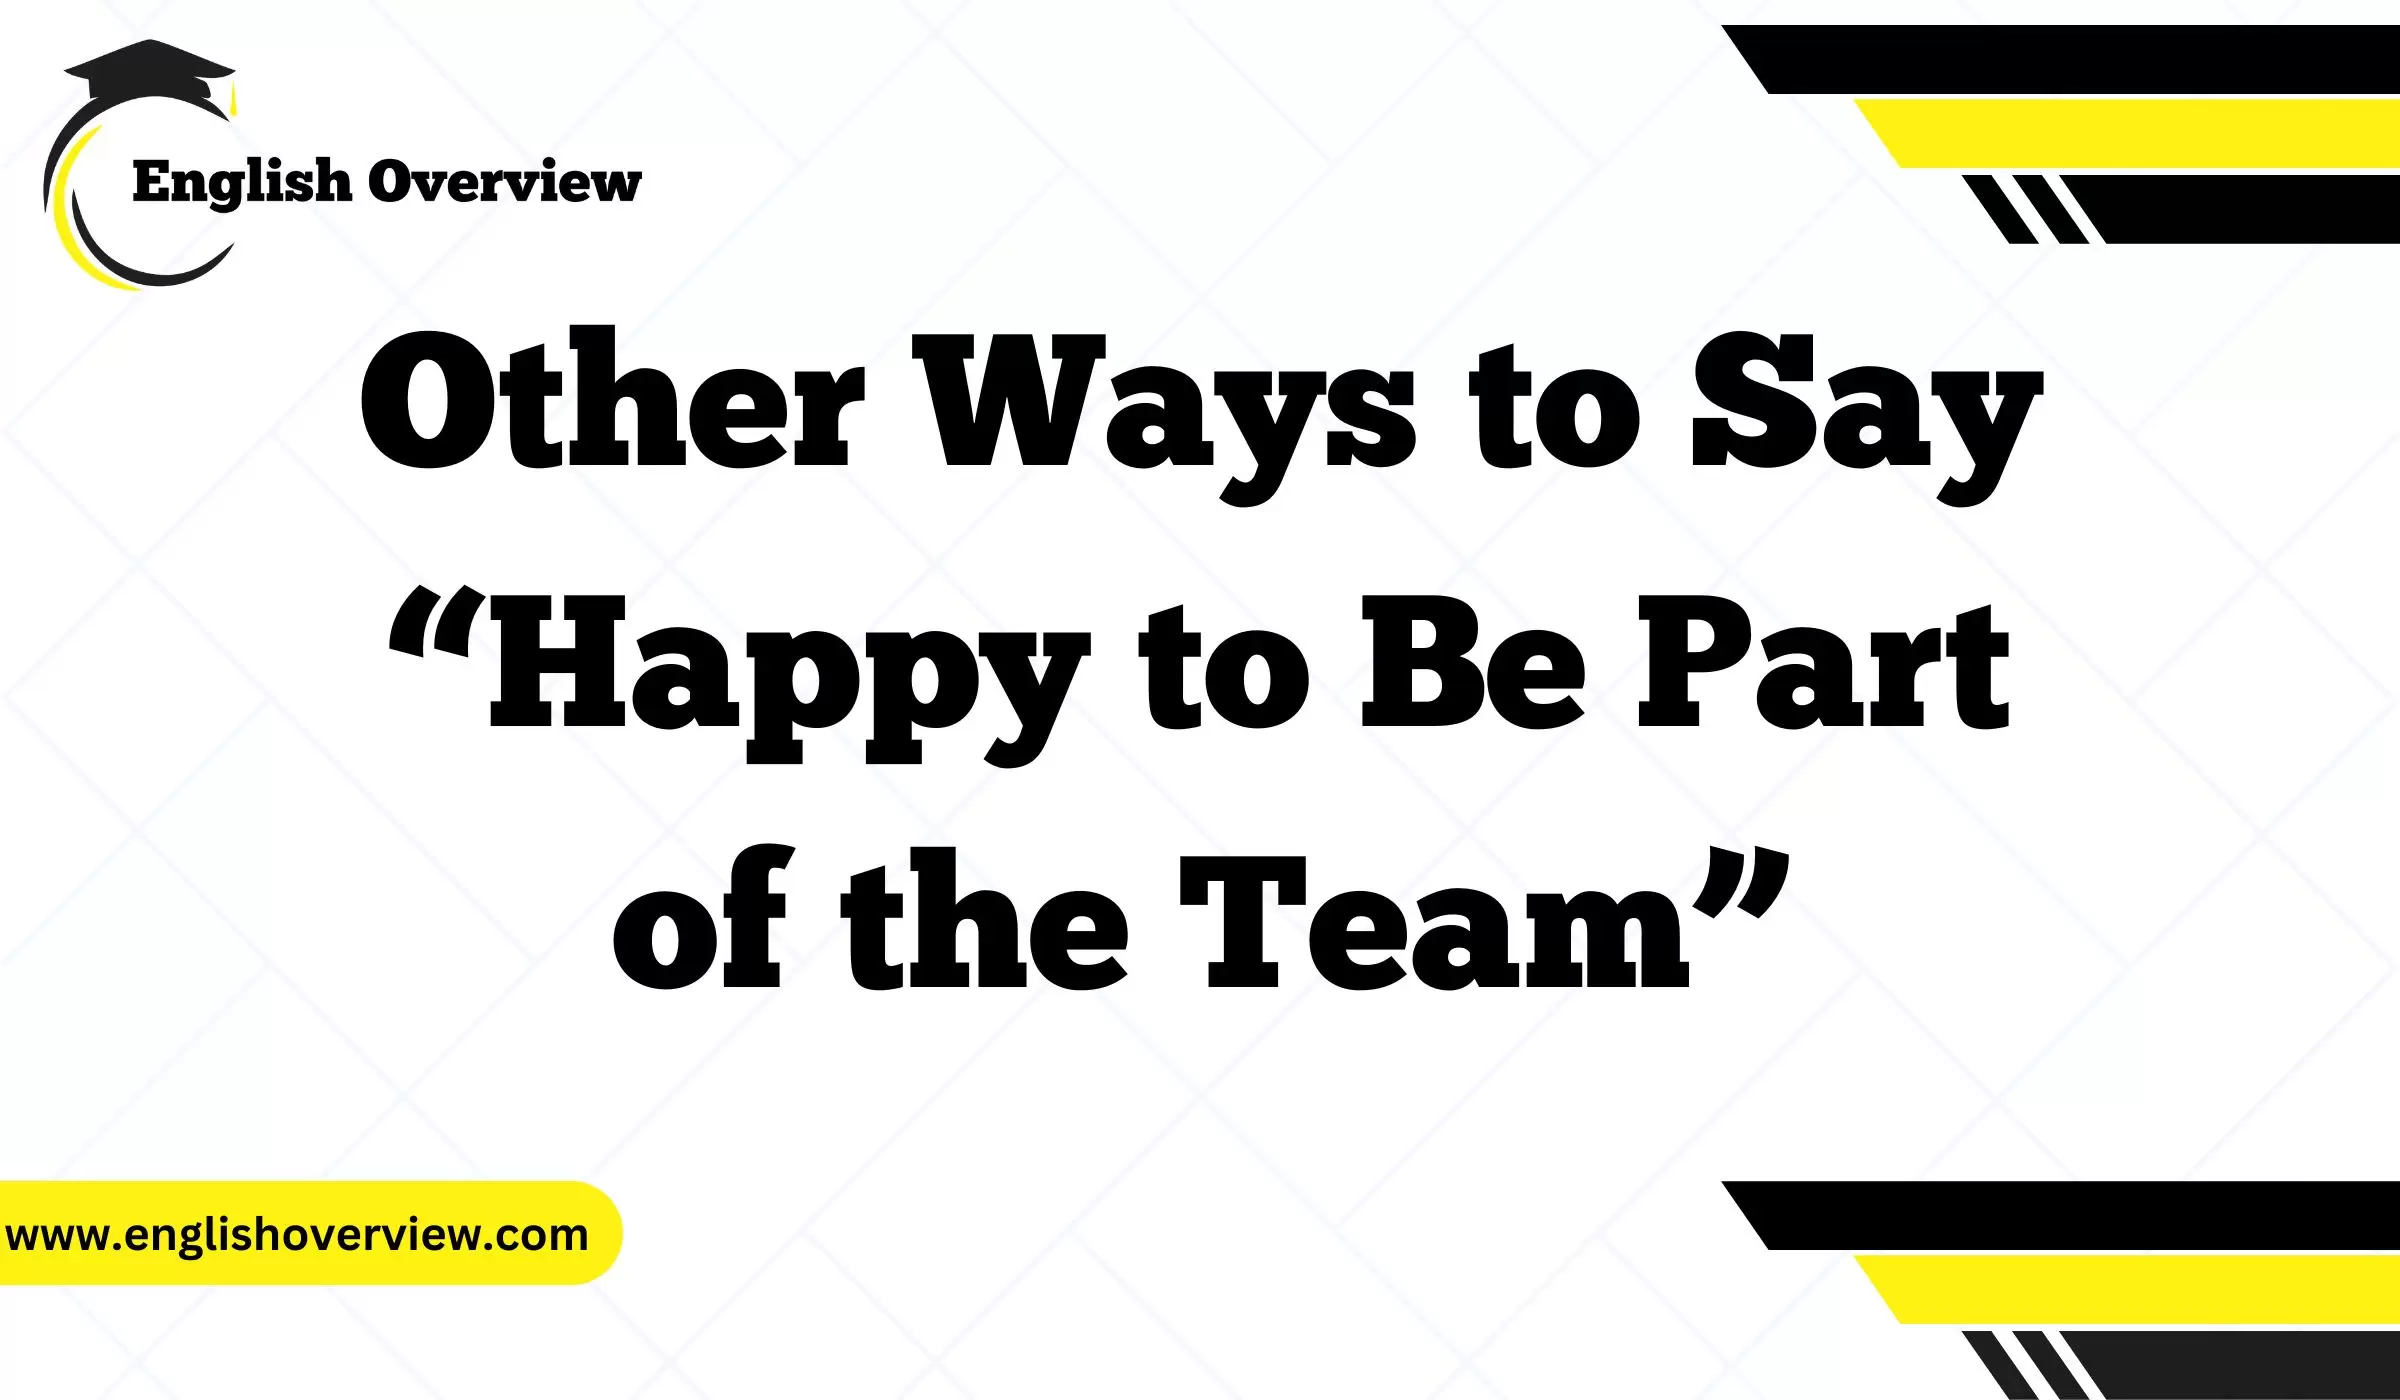 Other Ways to Say “Happy to Be Part of the Team”